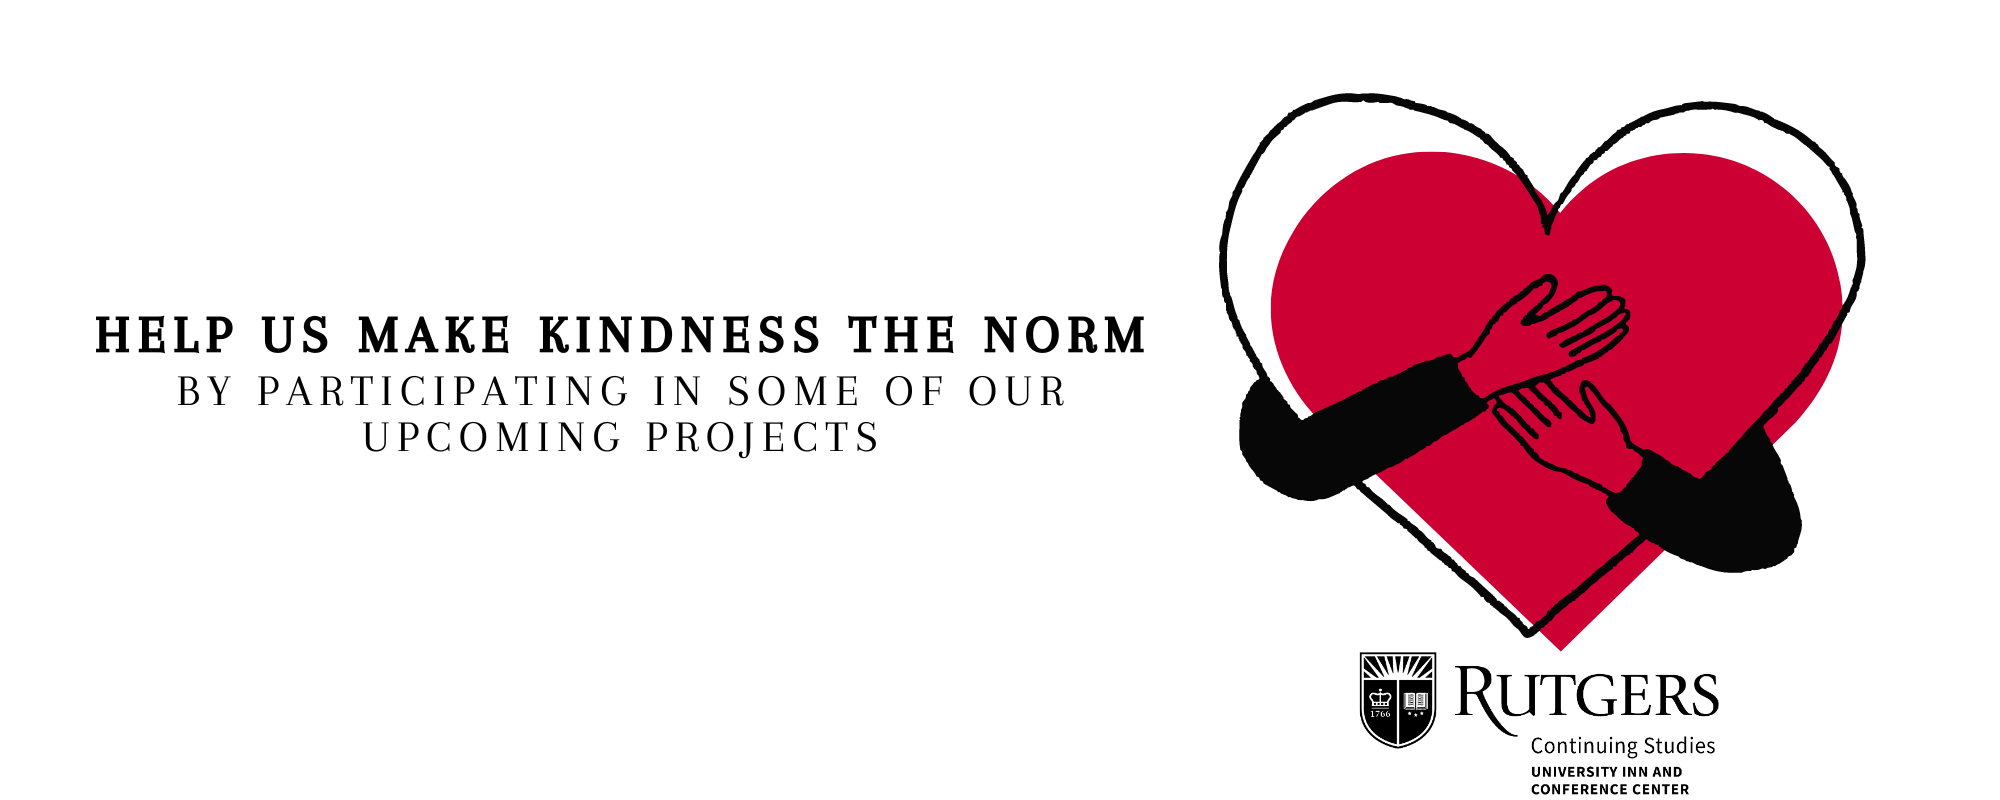 Help us make kindness the norm. By Participating in some of our upcoming projects